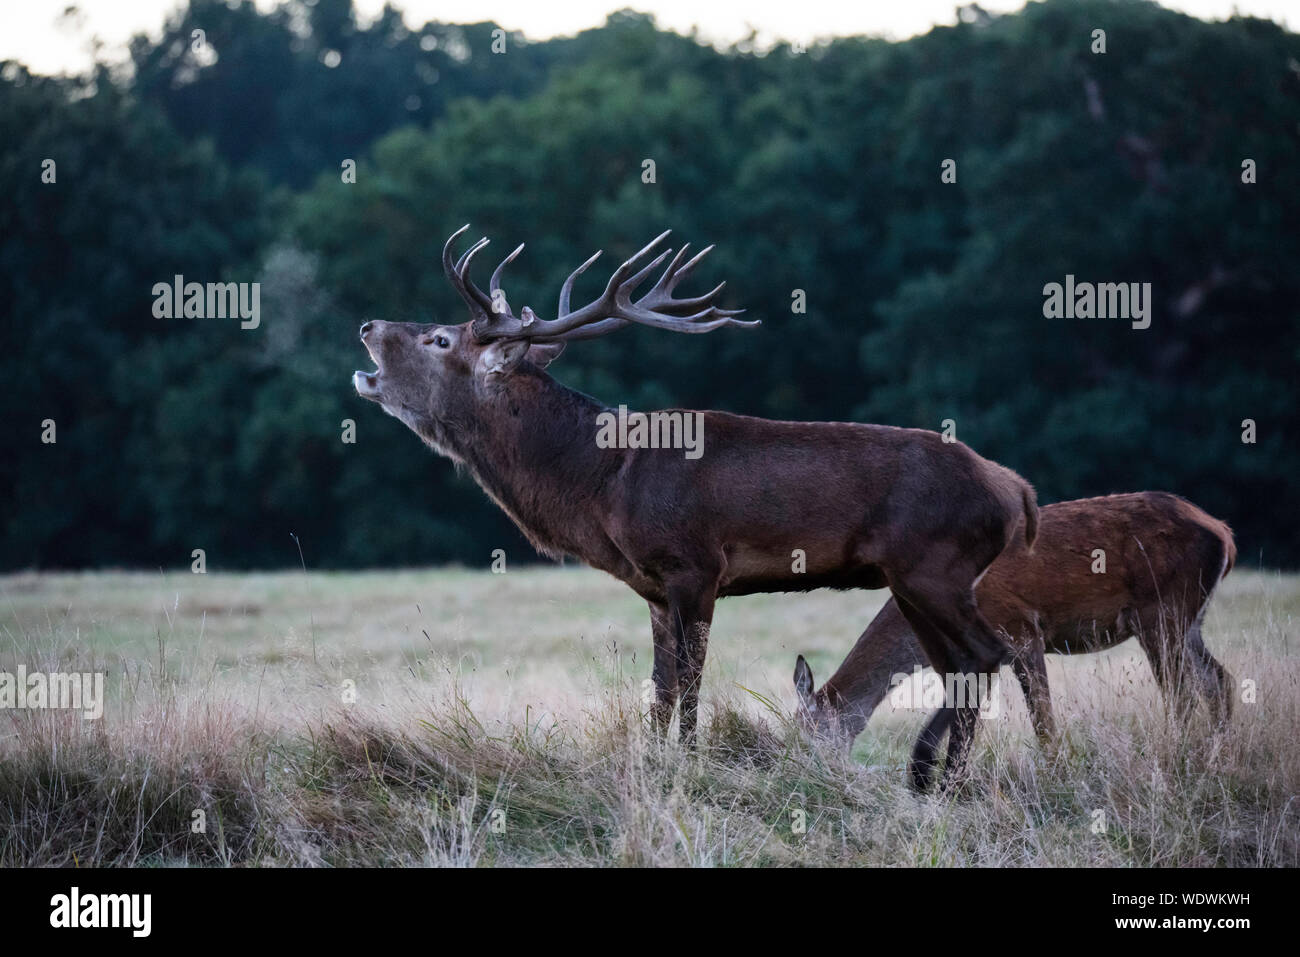 Red Deer Bellowing While Standing On Grassy Field Stock Photo